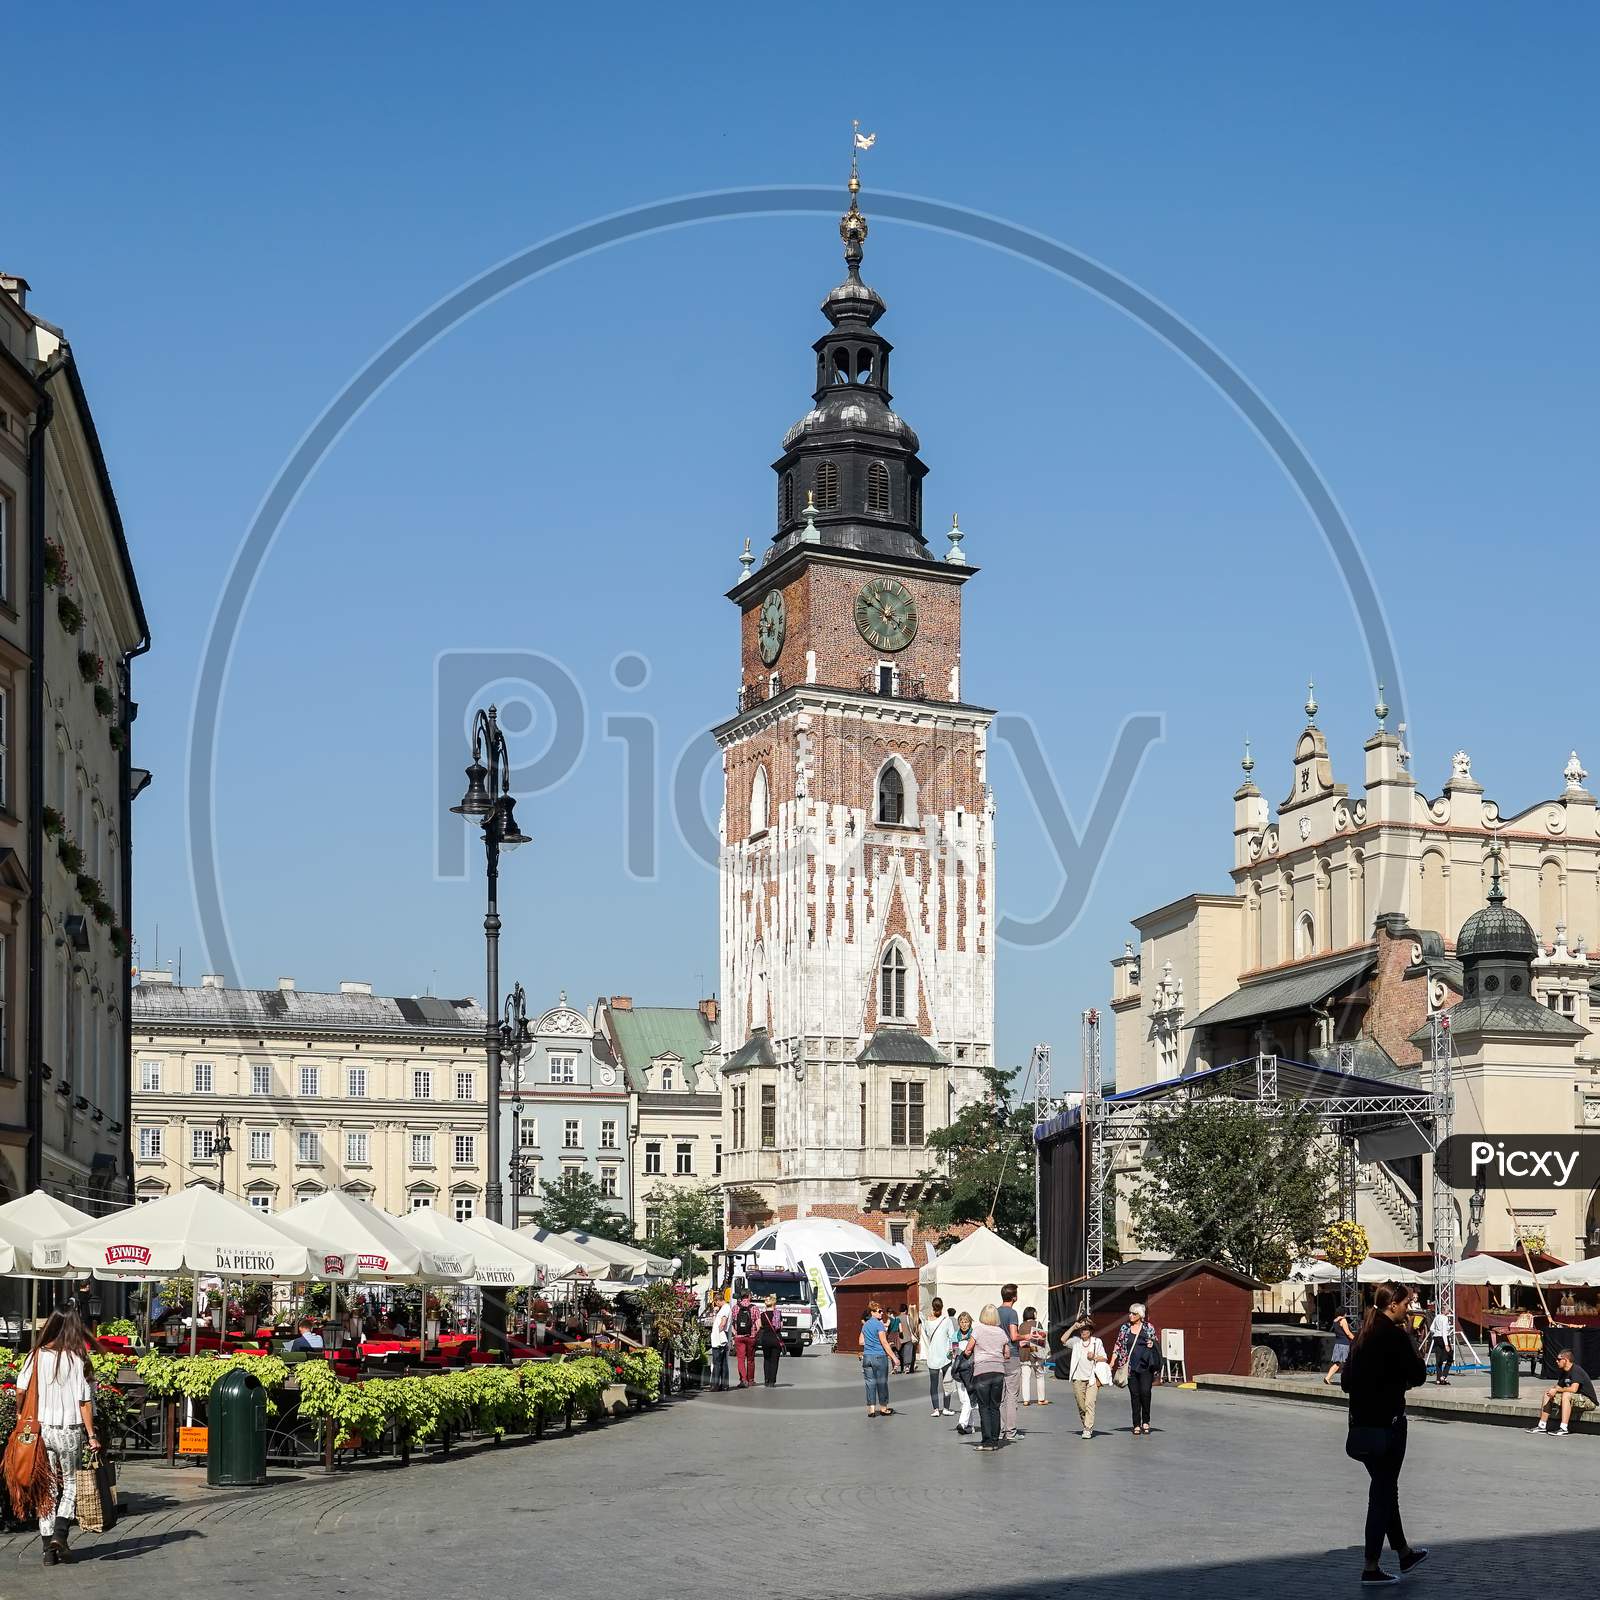 Town Hall Tower Market Square In Krakow